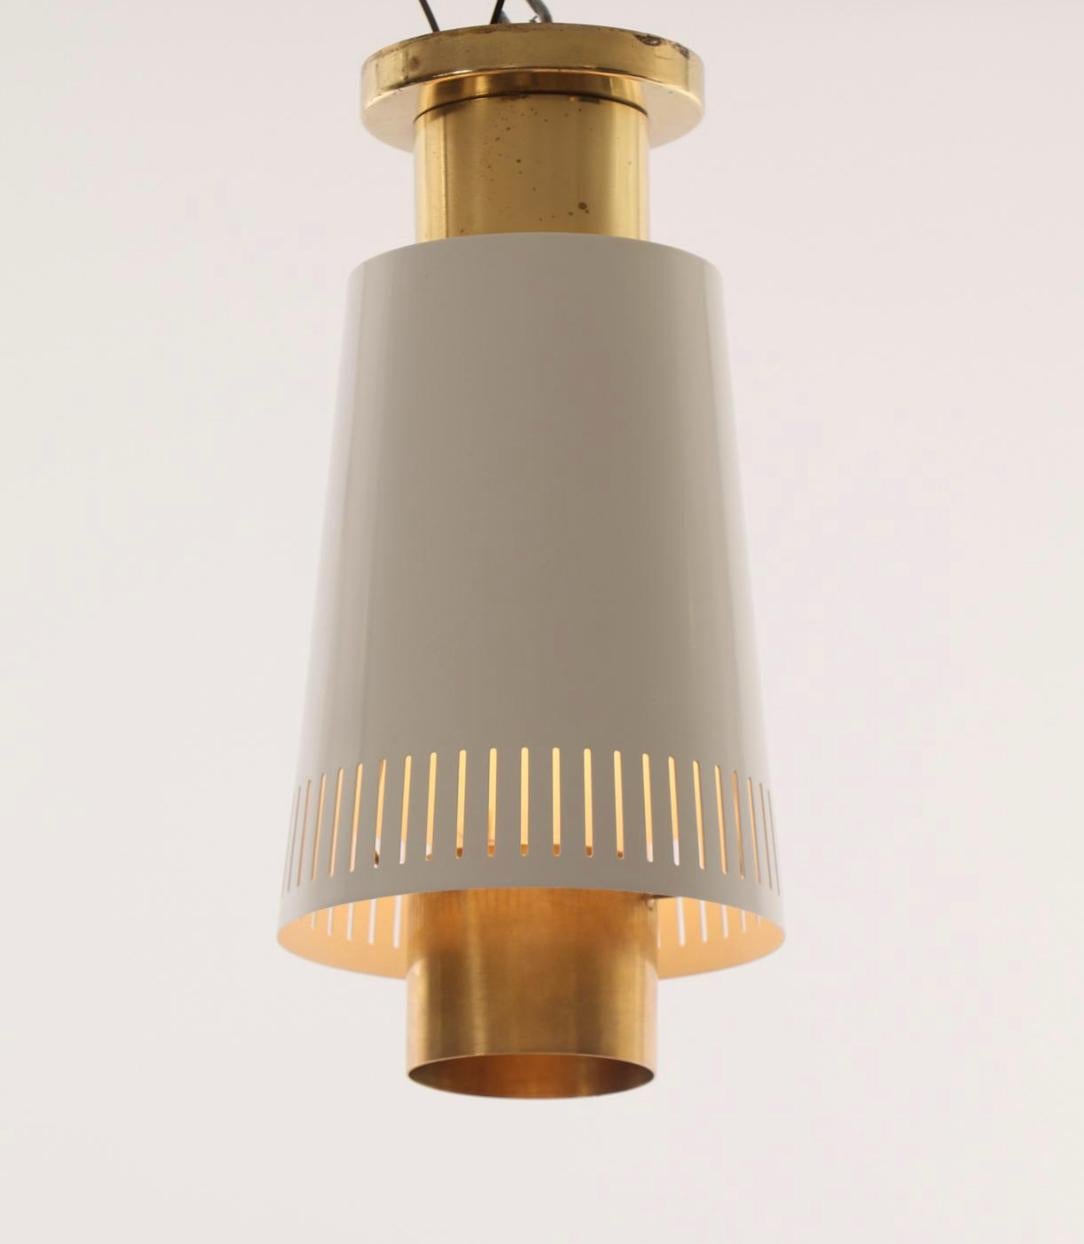 Pair of flush mount ceiling lights designed by Paavo Tynell, Model 9067. Finland, circa 1950.
Polished brass and lacquered metal. One marked Taito and second marked Idman.
Existing electrical wiring, rewiring available upon request.